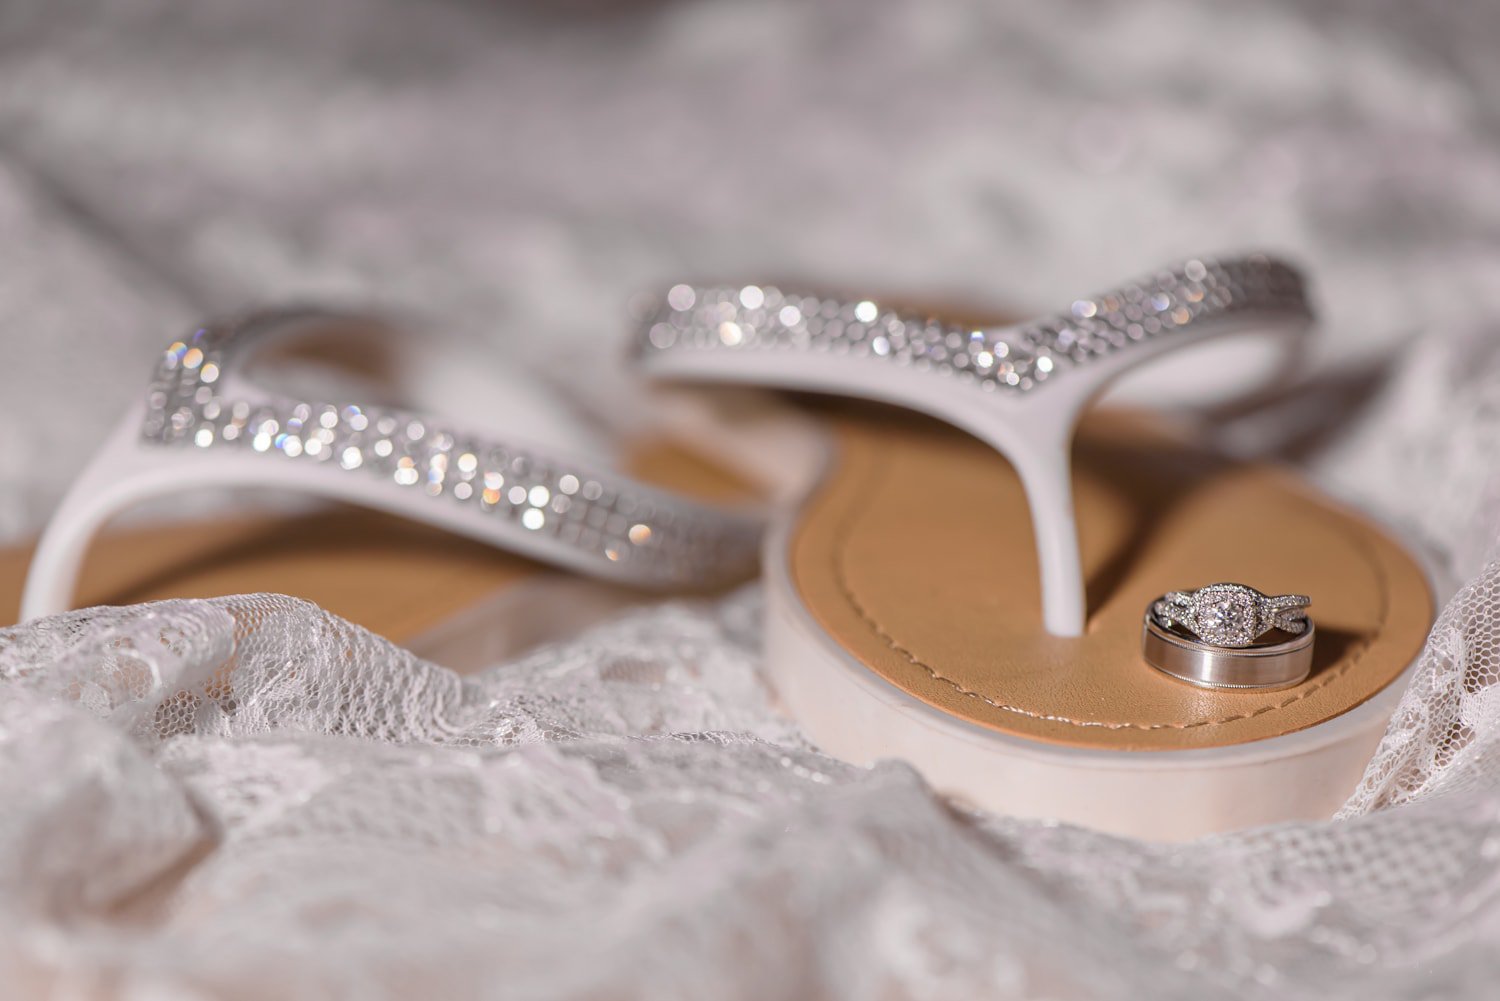 The bride's wedding shoes were sandals and their wedding rings.